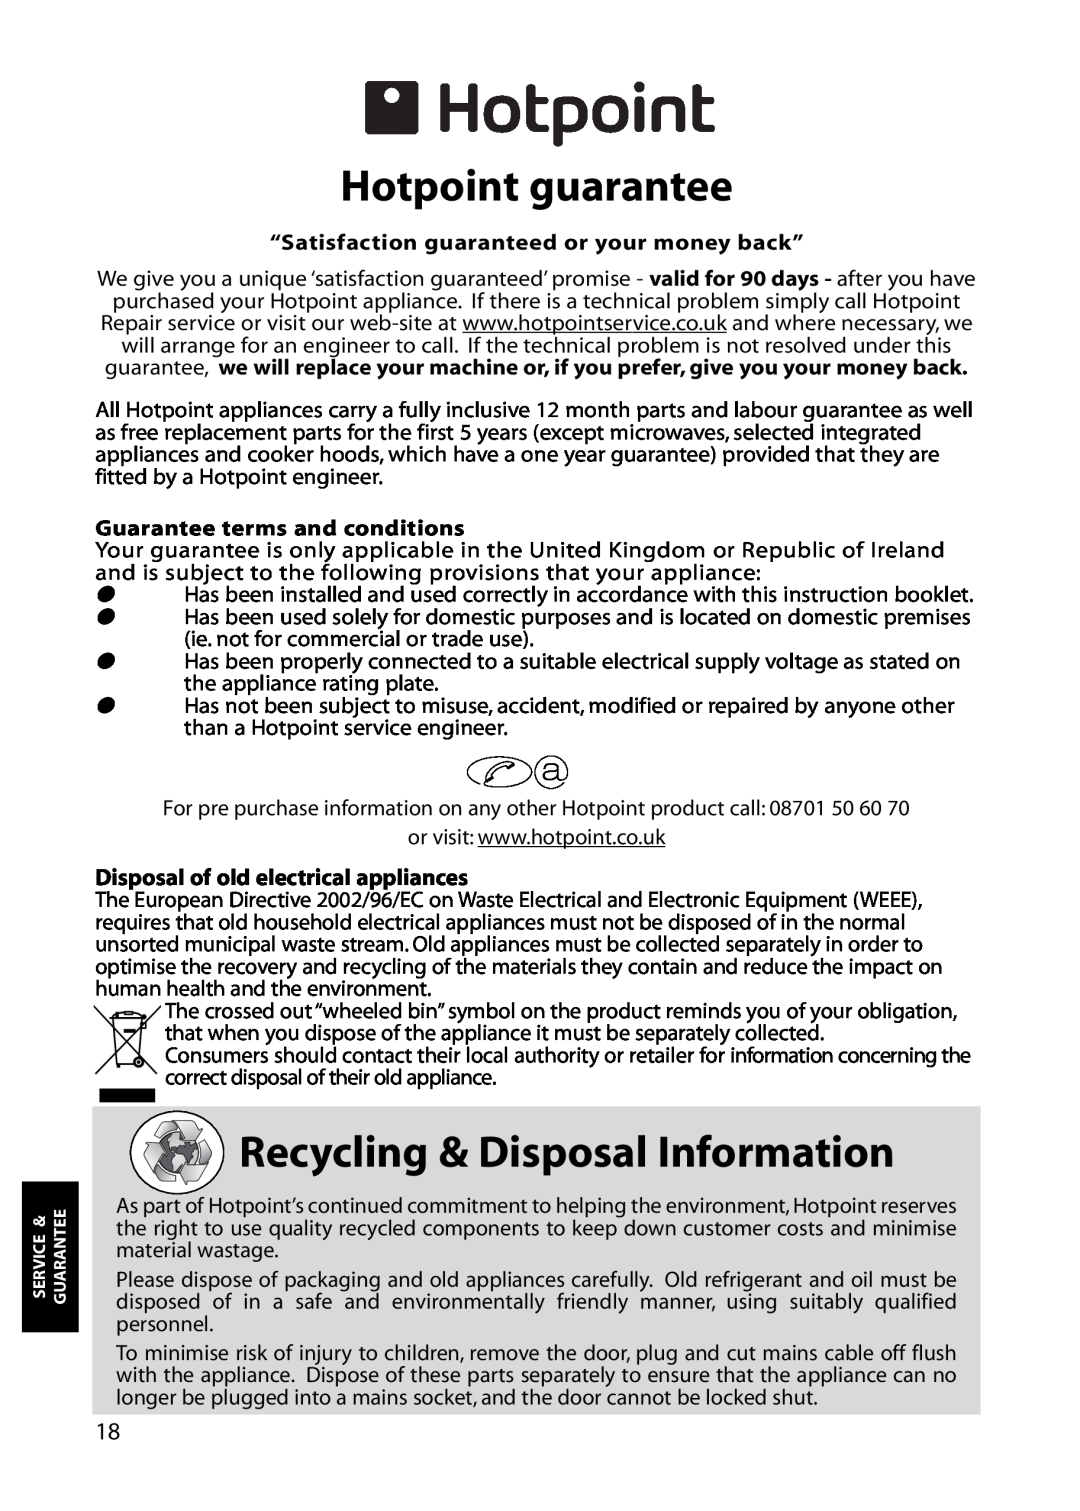 Hotpoint FZA84, FZM84, FZA54 Hotpoint guarantee, Recycling & Disposal Information, Disposal of old electrical appliances 